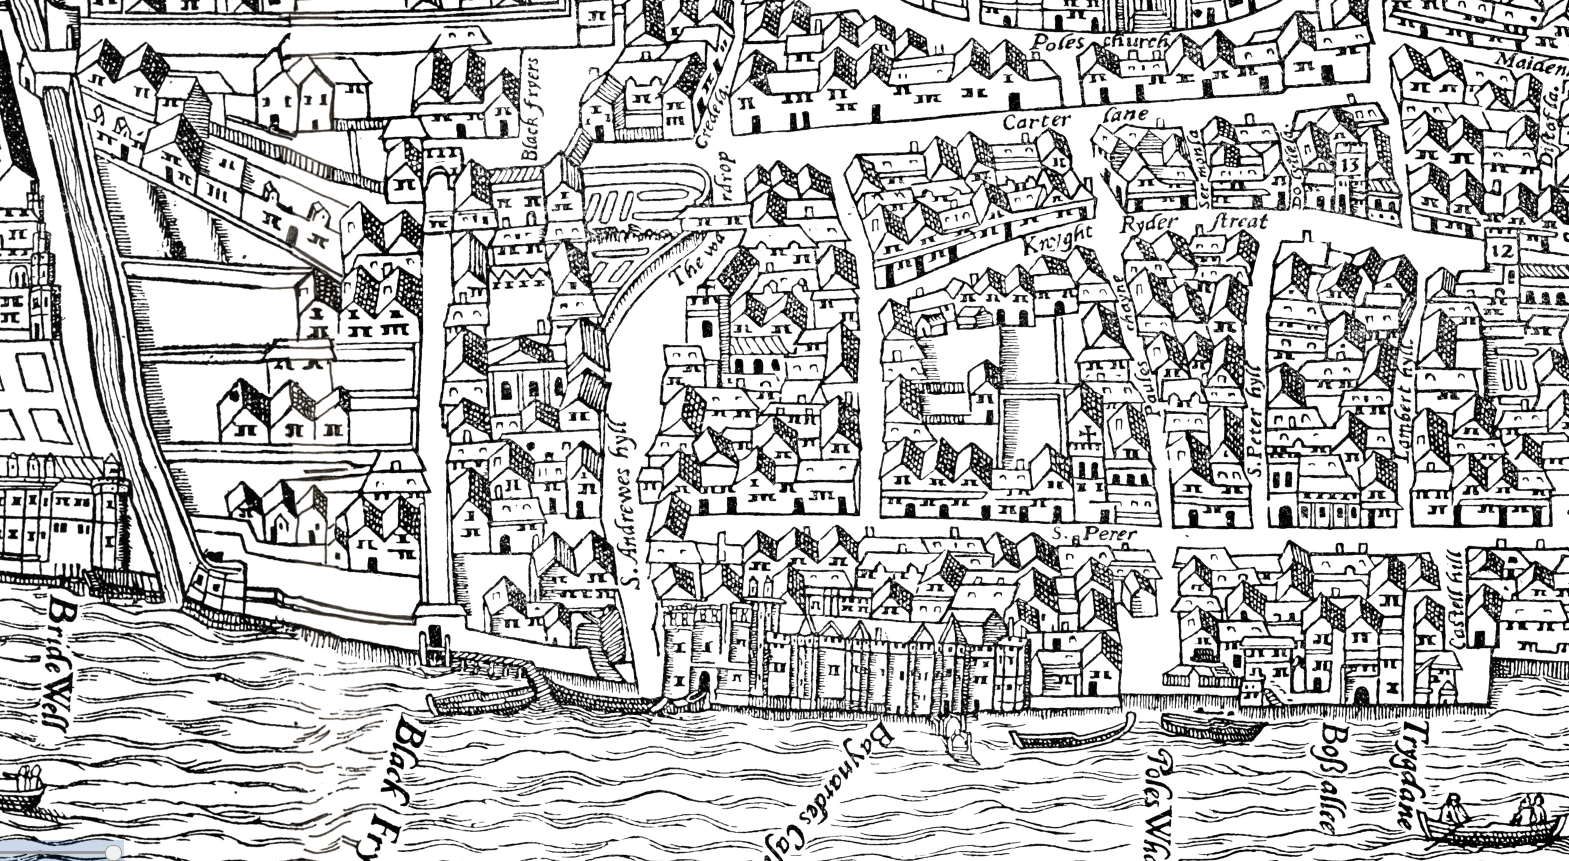 Agas' map of Oxford of 1578 - part pictorial, part cartographic and unusually accurate for a map of this date.